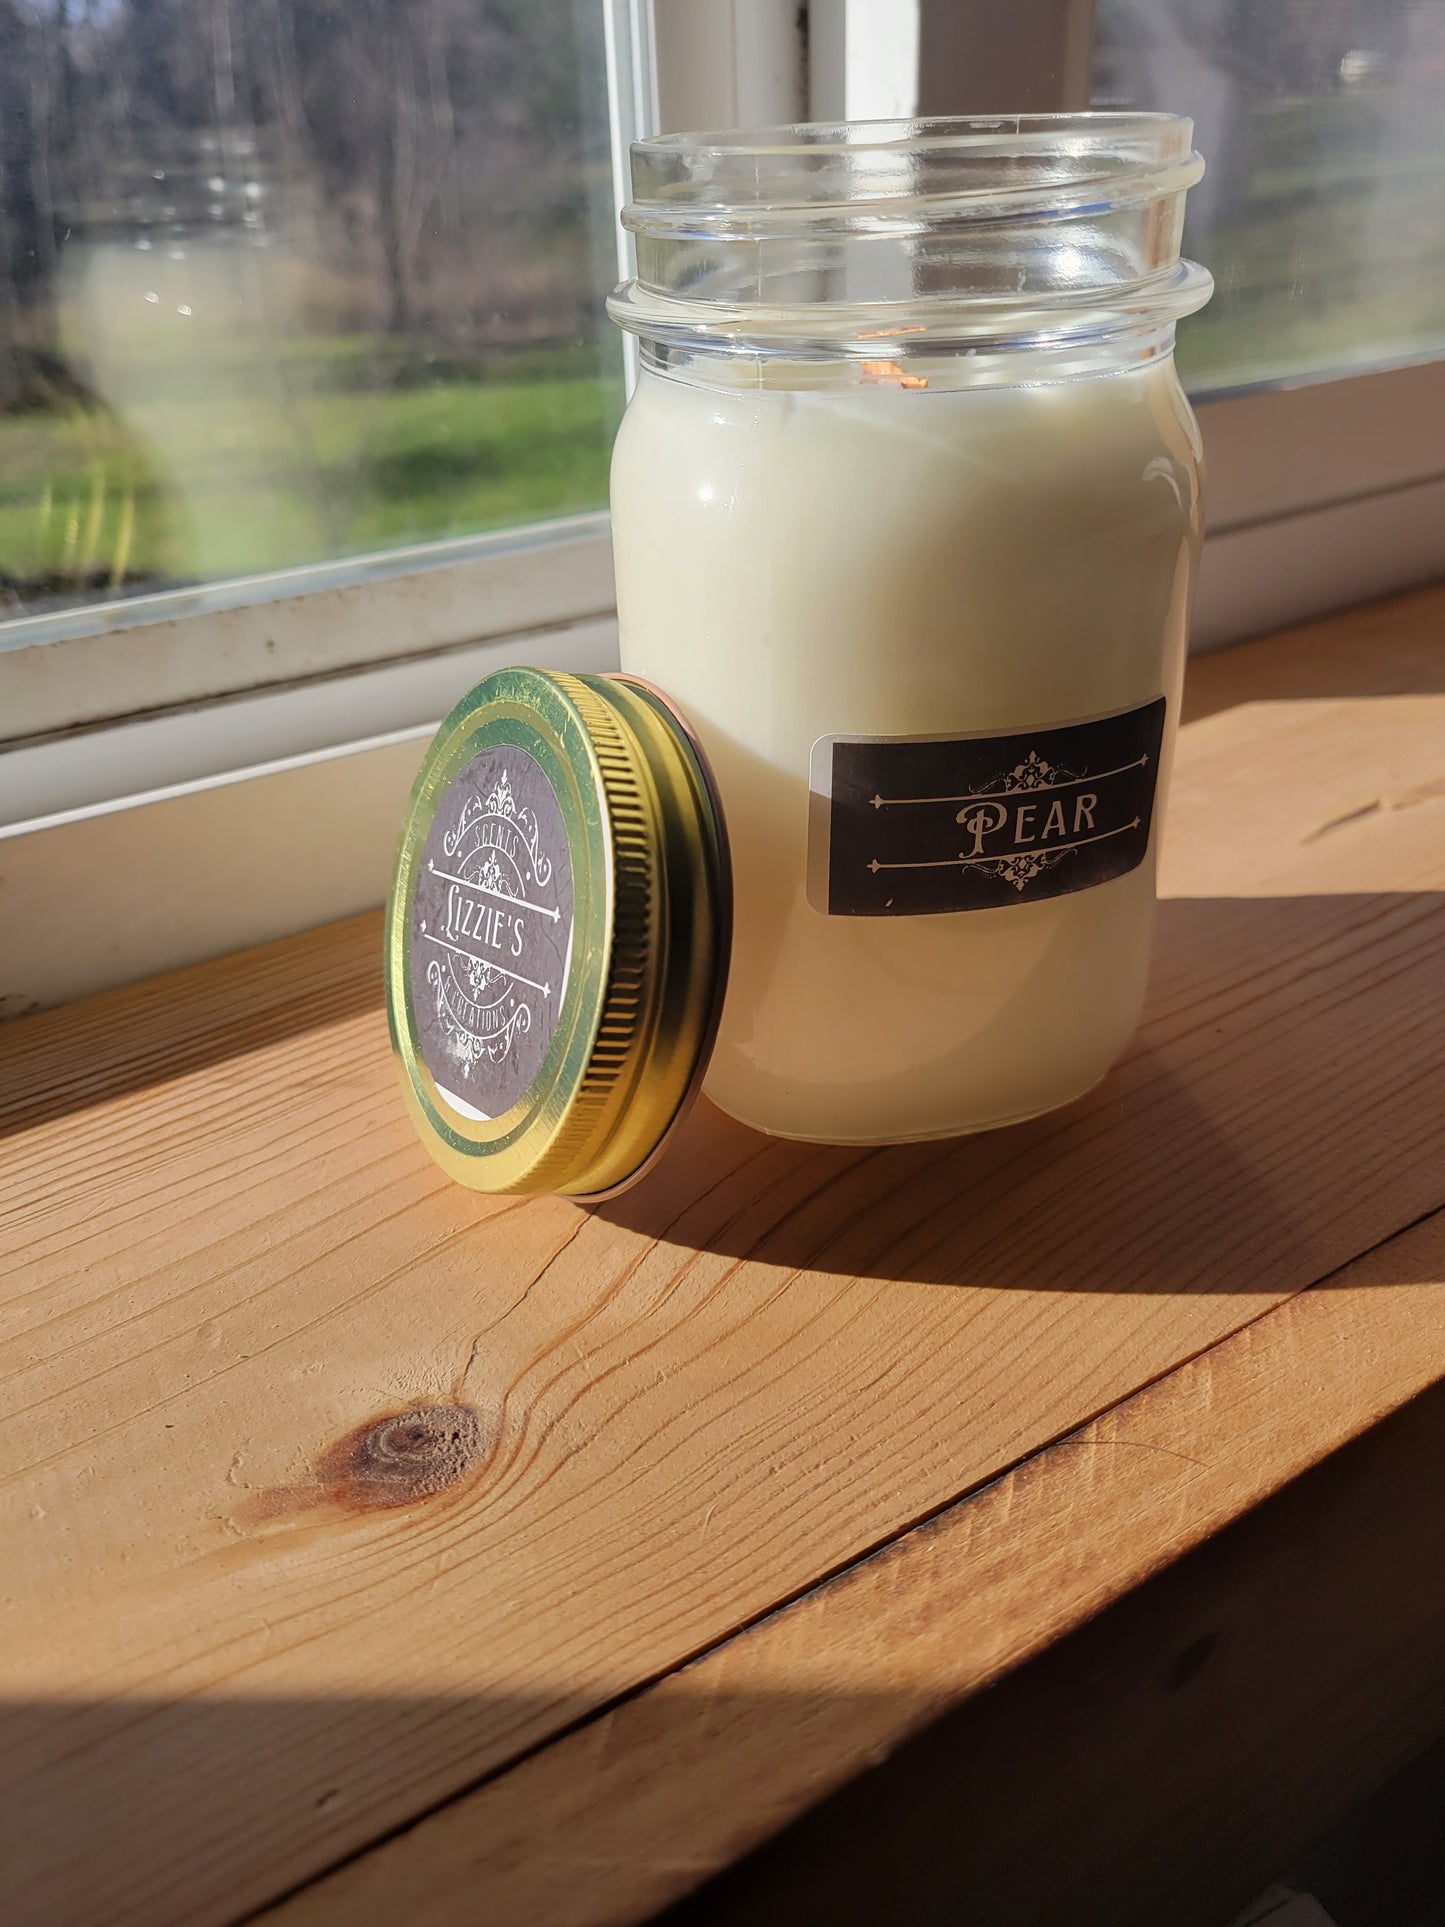 Pear Scented candle in glass jar